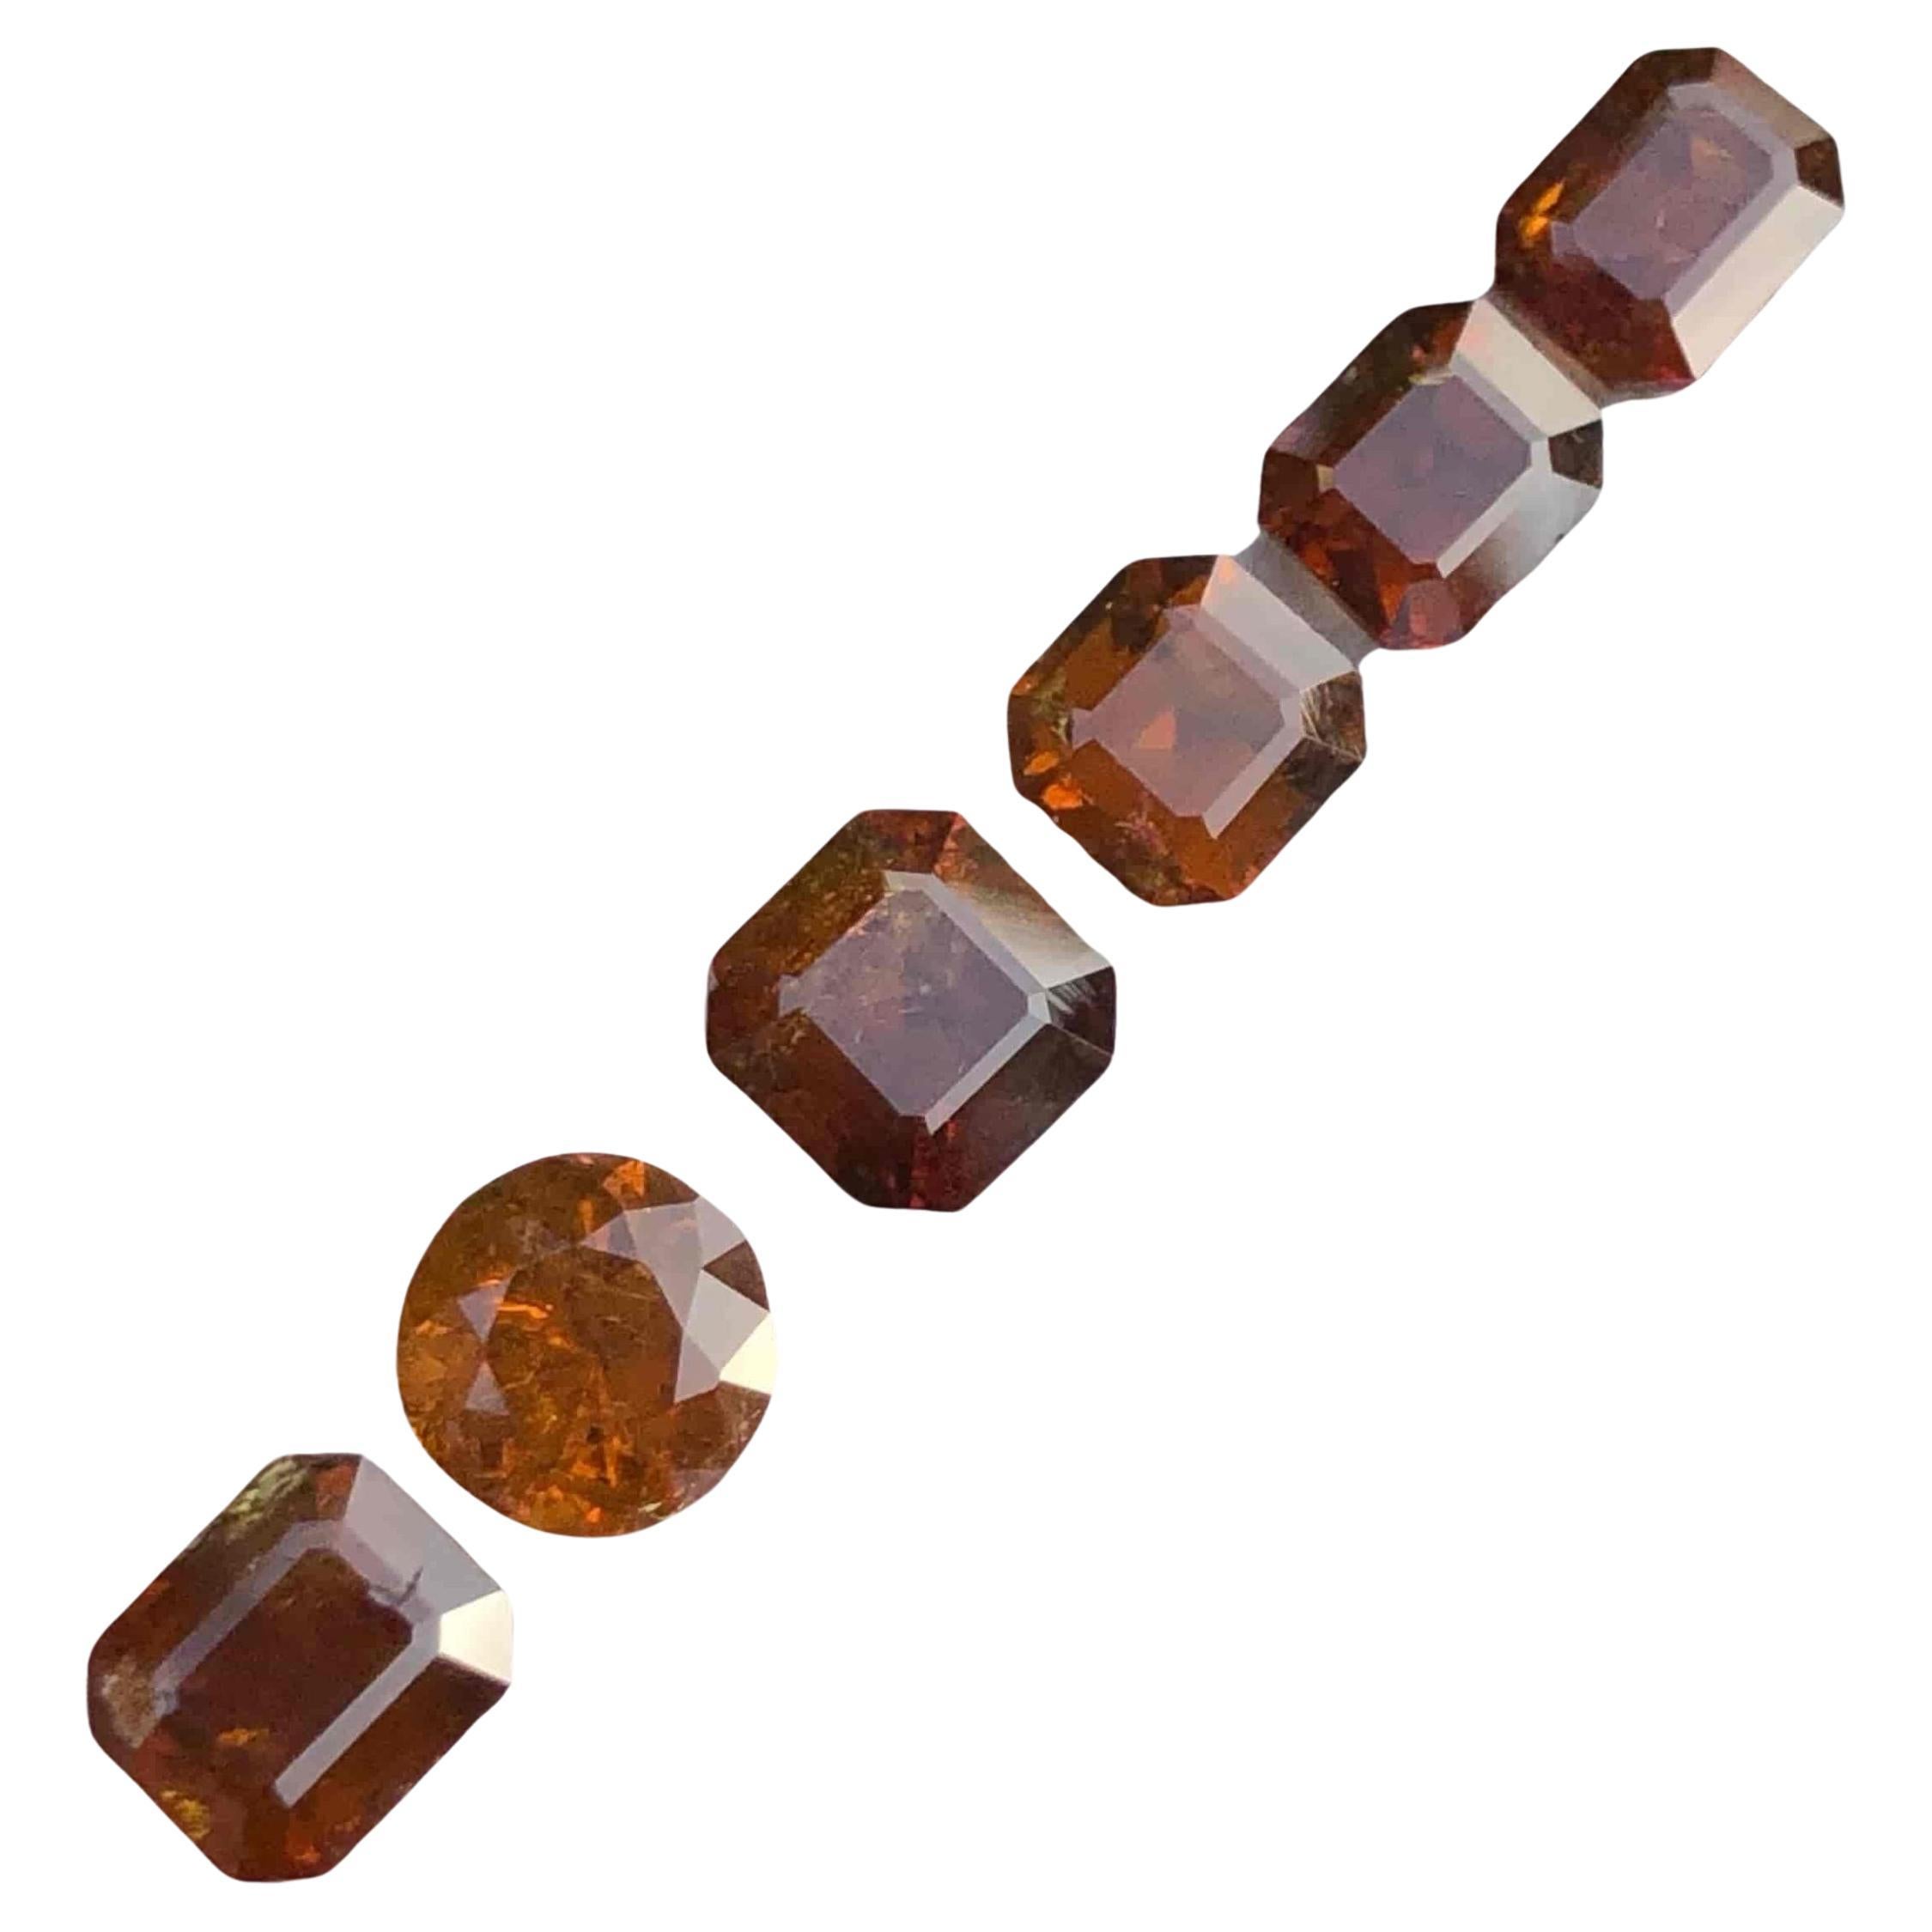 10.15 carats Natural Brown Garnet Stones Lot Loose Gemstones From Mali Africa For Sale